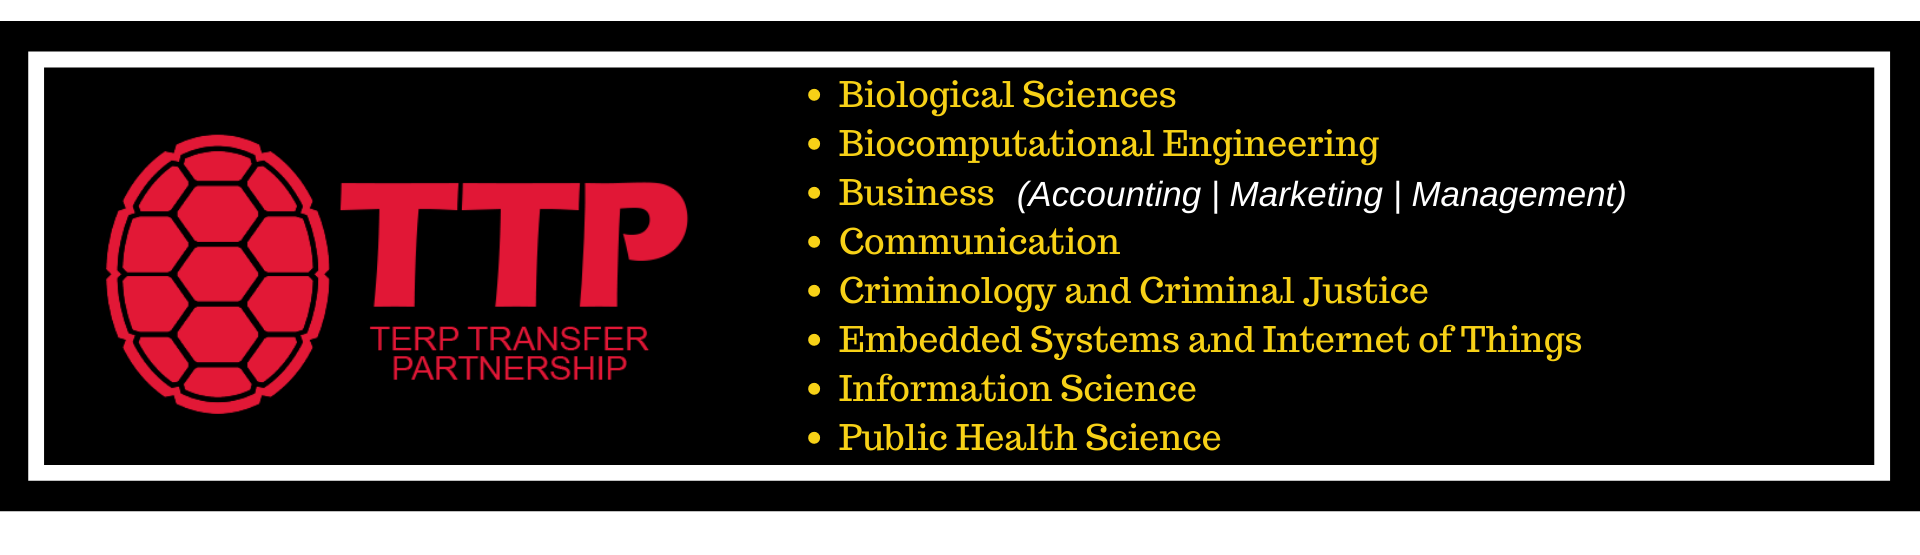 Terp Transfer Partnership Majors: Biological Sciences, Biocomputational Engineering, Business (Accounting, Marketing, Mangagement), Communication, Criminology and Criminal Justice, Embedded Systems and Internet of Things, Information Science, Public Health Science